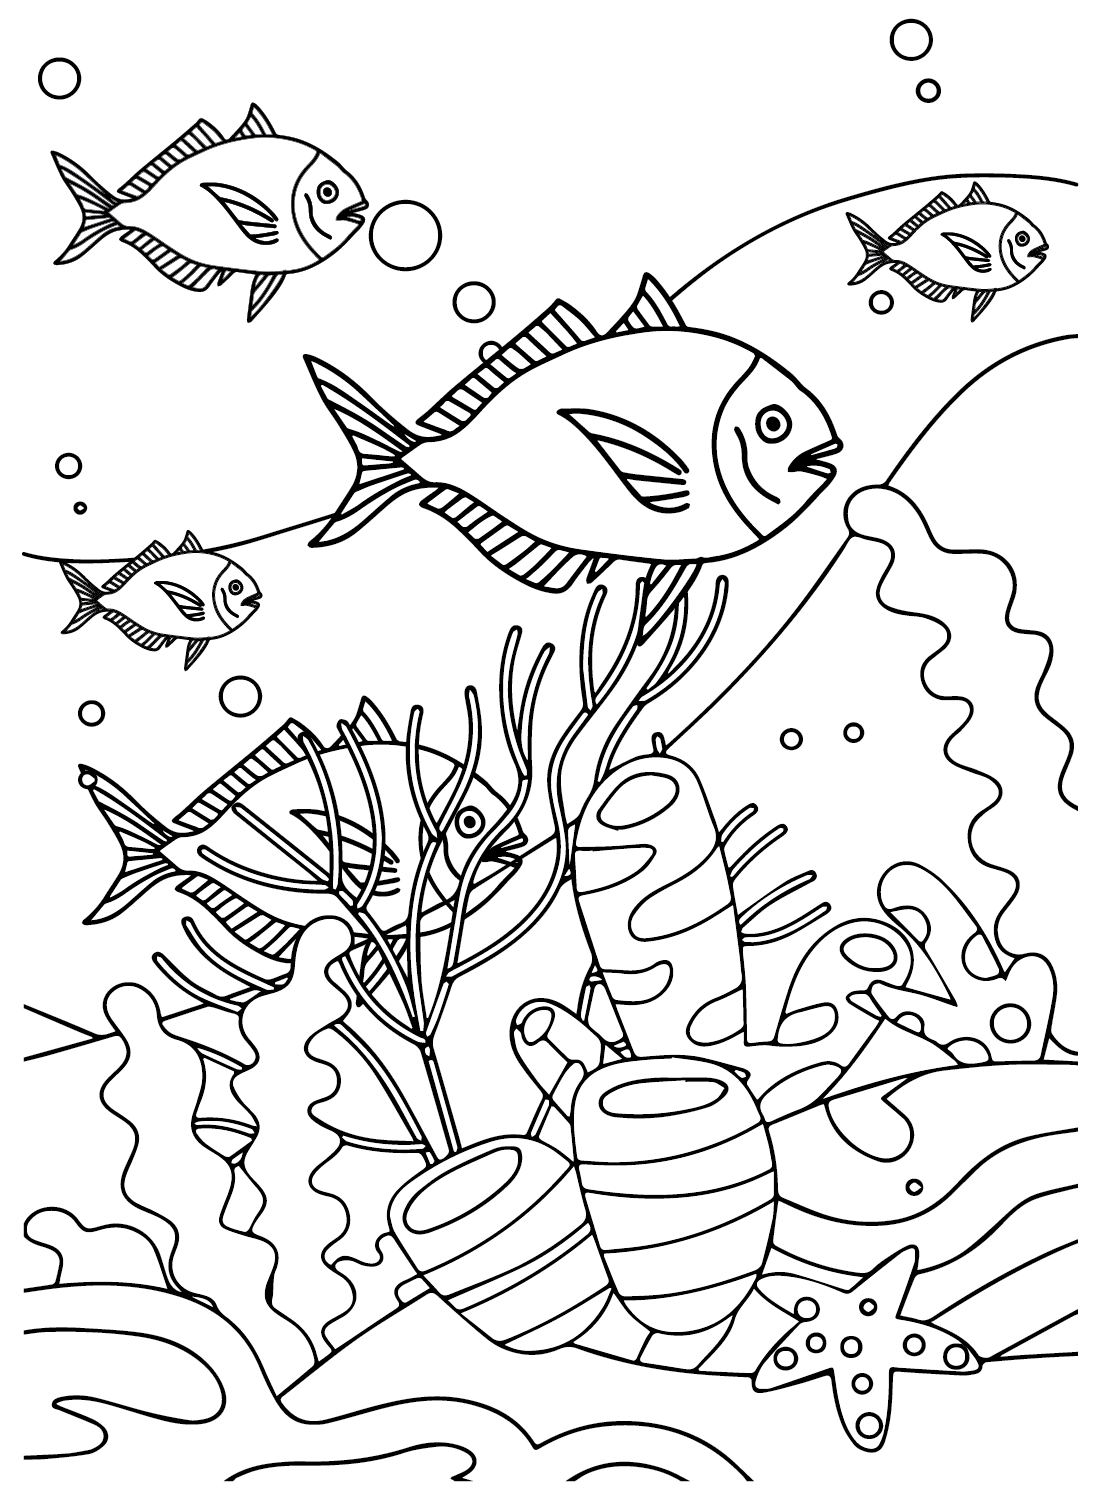 Basses Fish color Sheets Coloring Page - Free Printable Coloring Pages